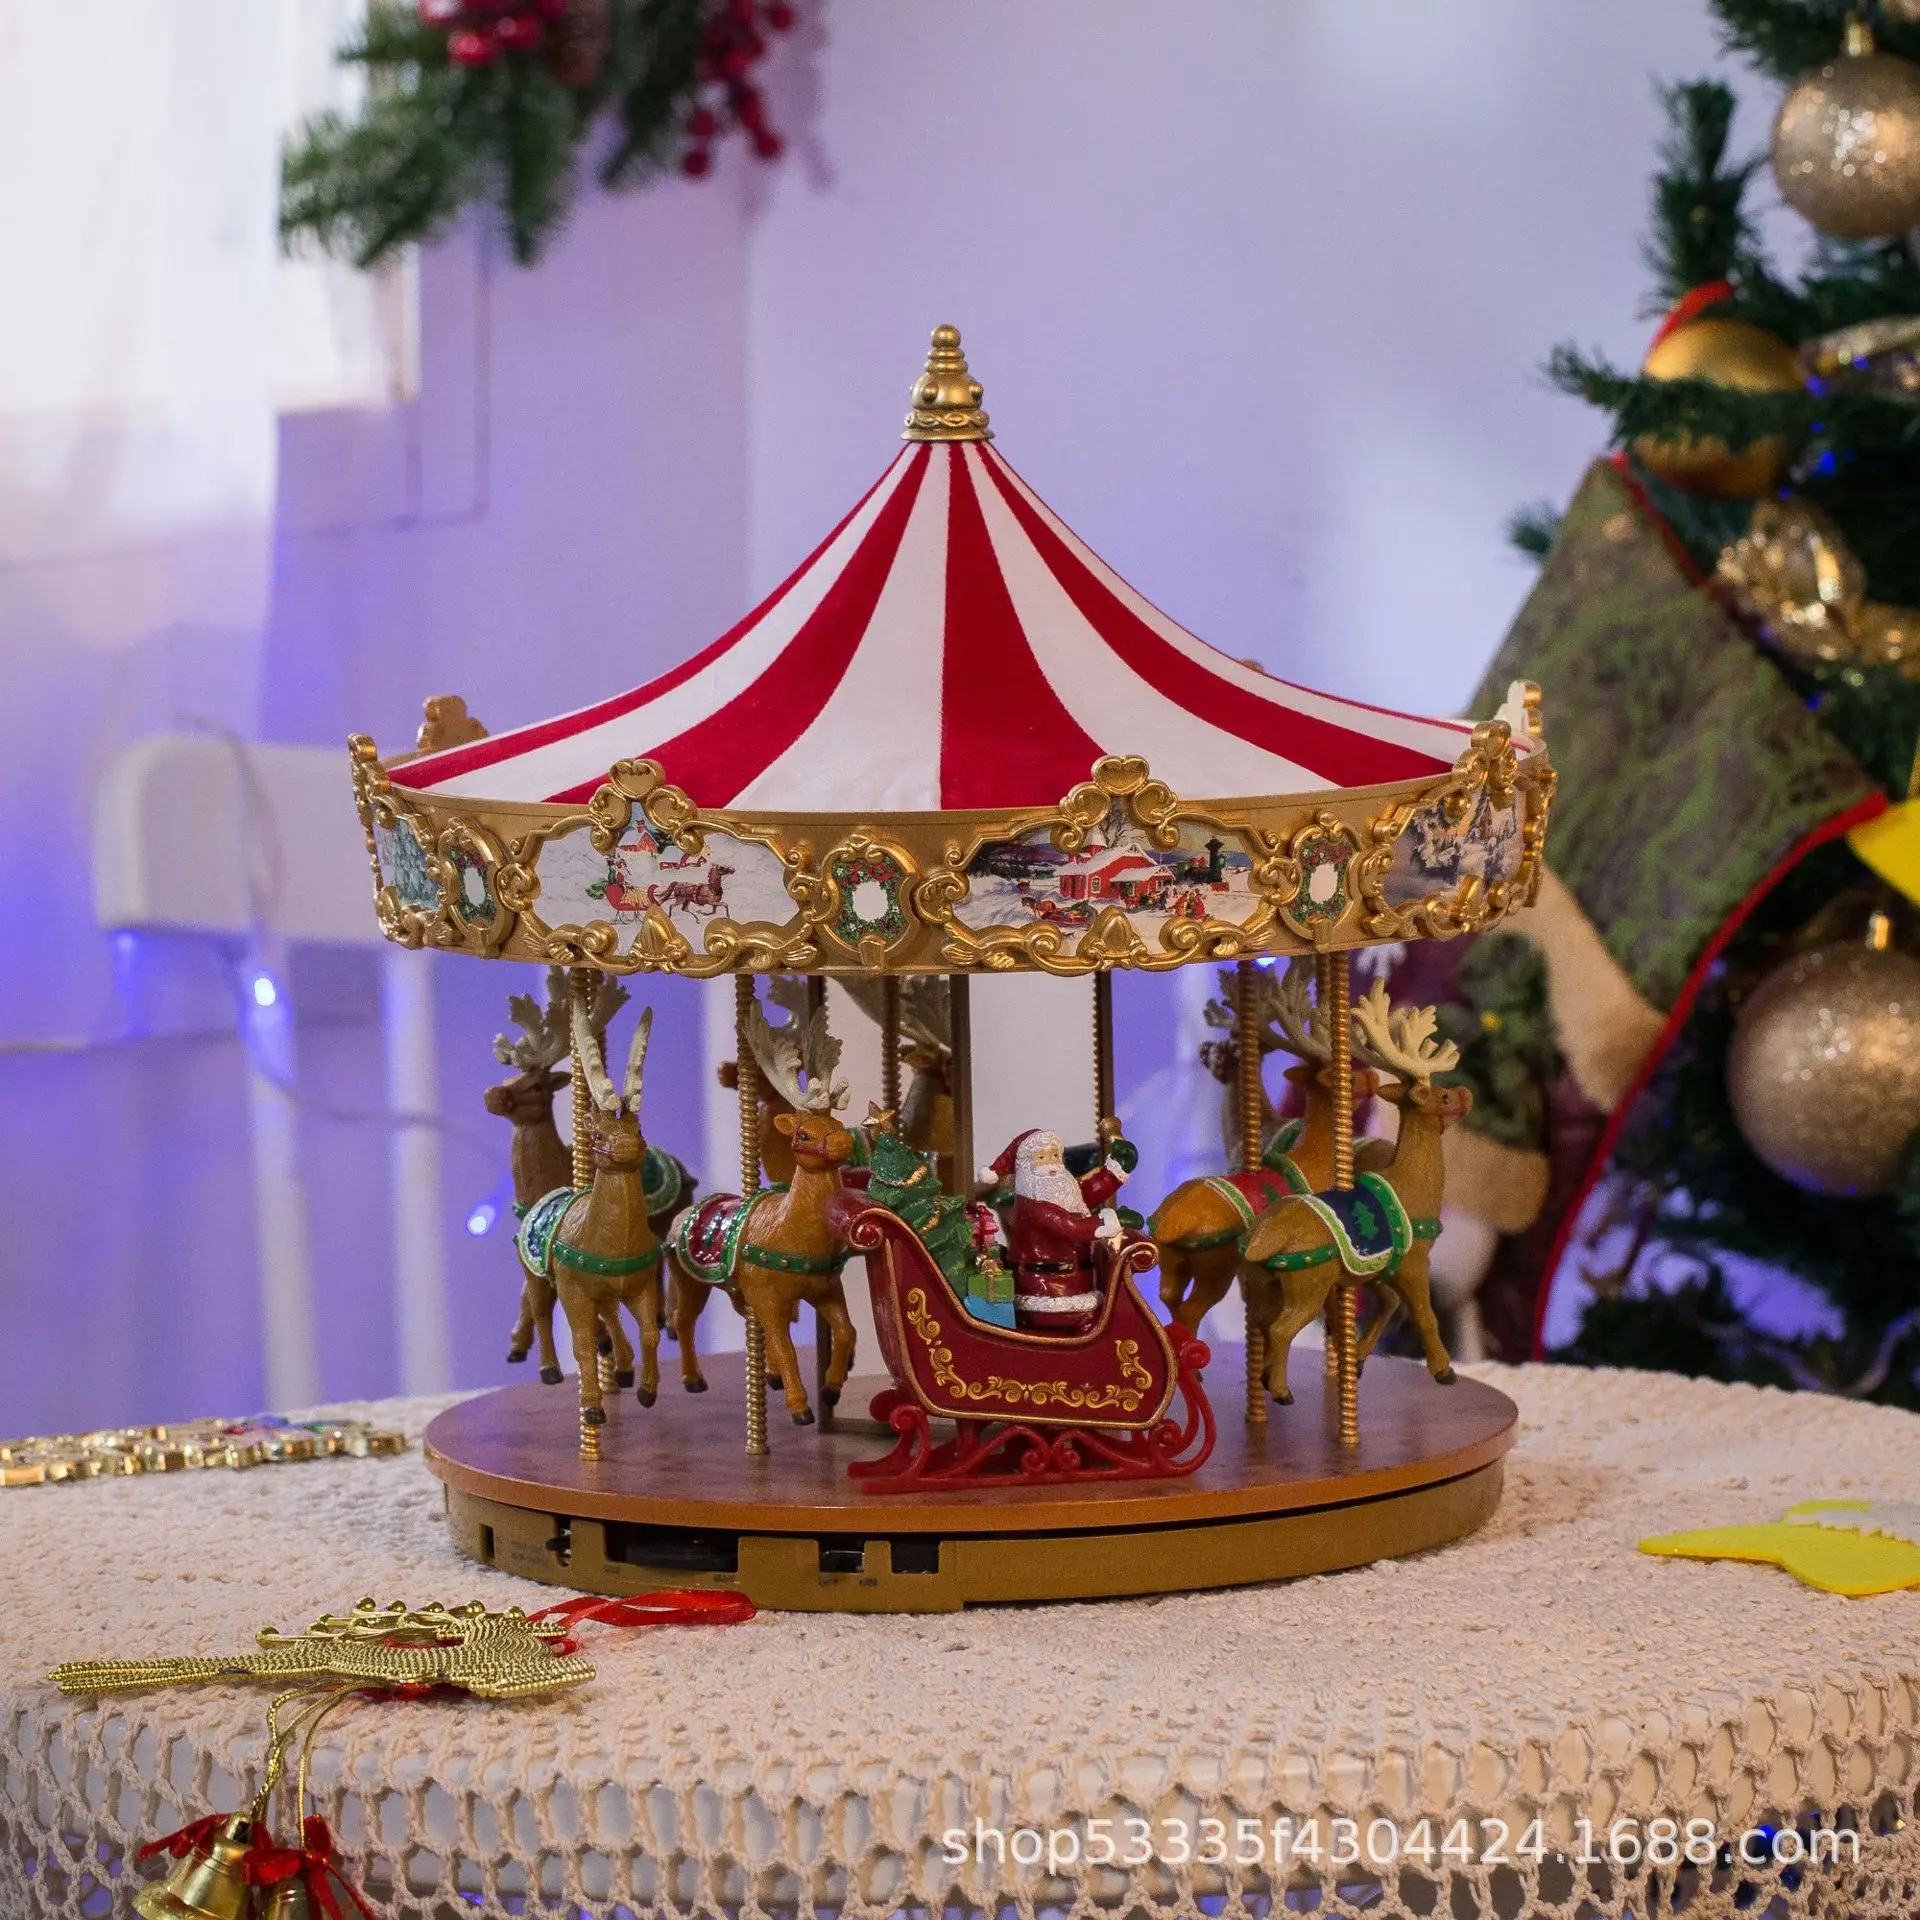 

Christmas Presents His Girlfriend With A Xmas Music Box A Merry Go Round Birthday Gift And a Music Box For His Girlfriend's